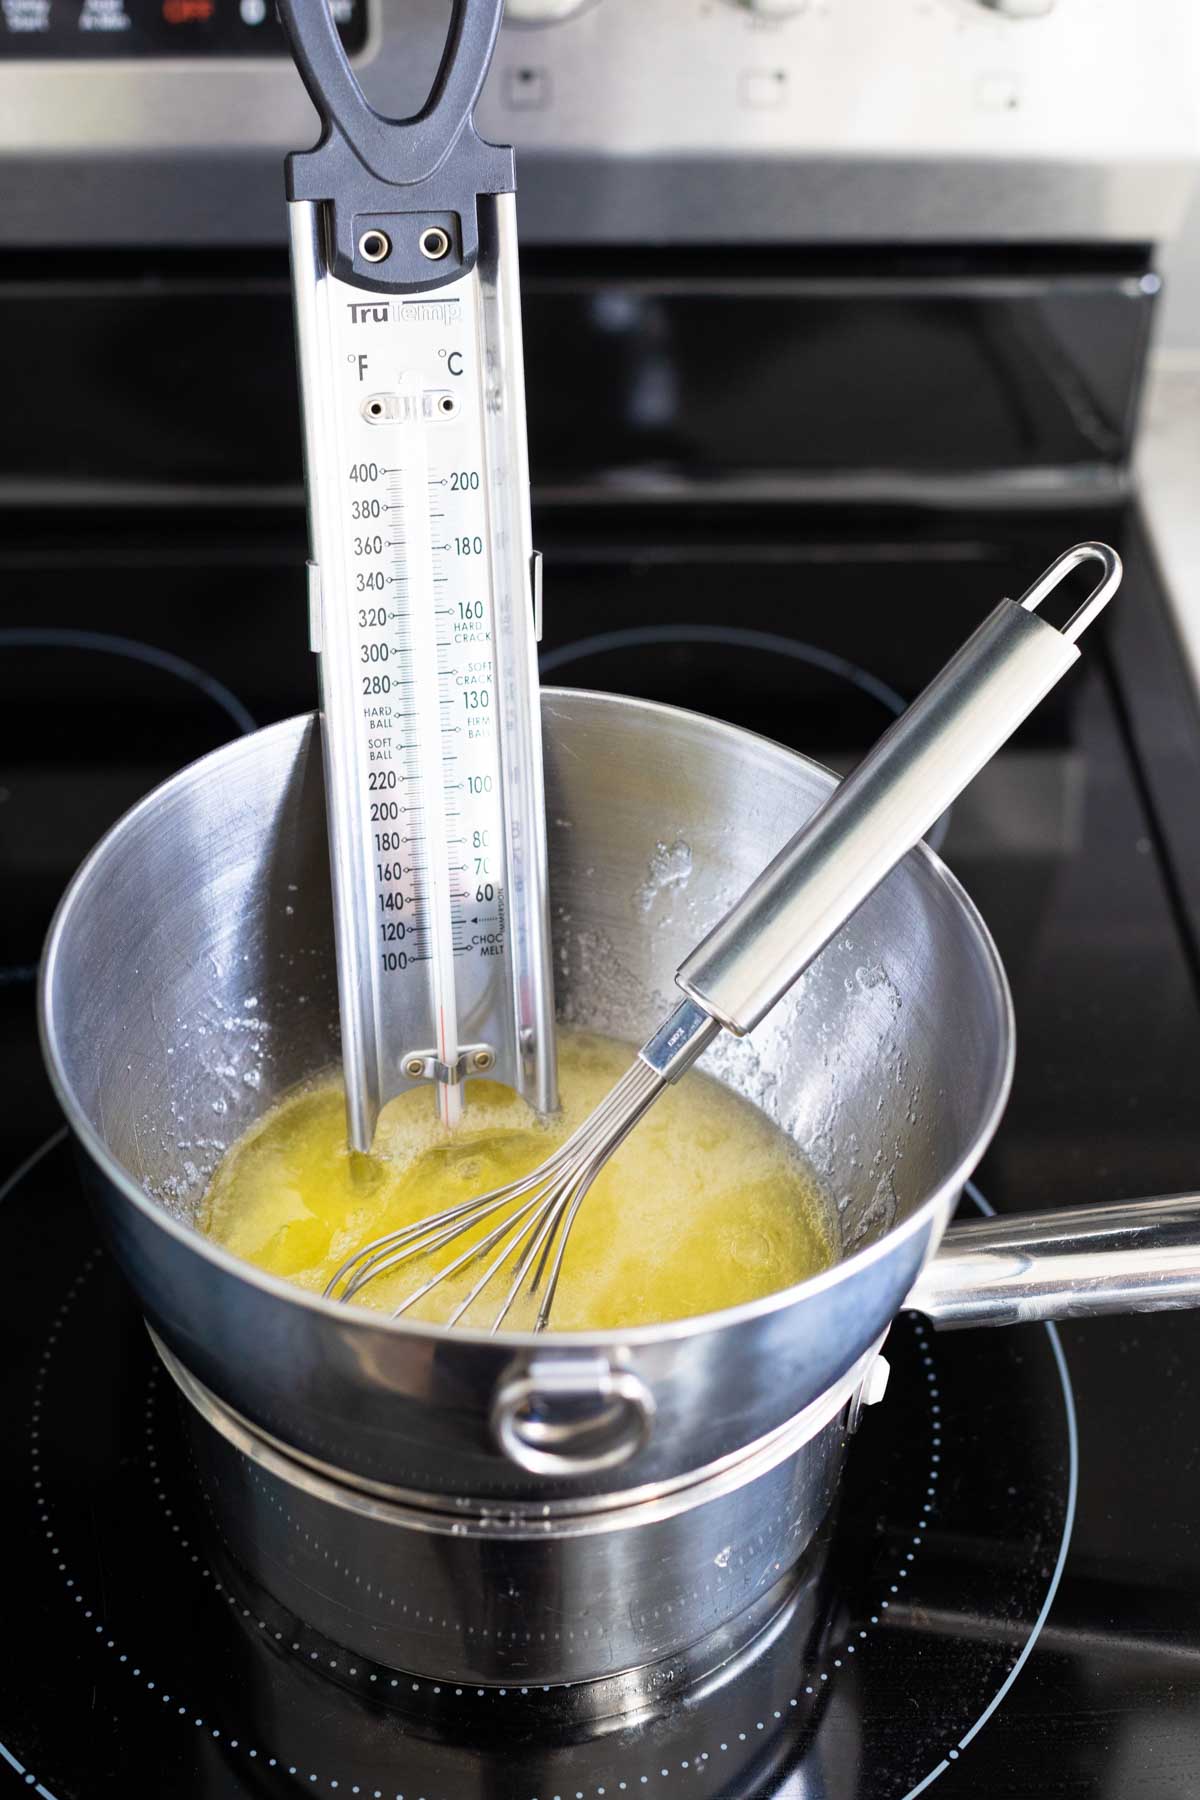 The double boiler has a candy thermometer so the egg whites can be whisked to 160°F.